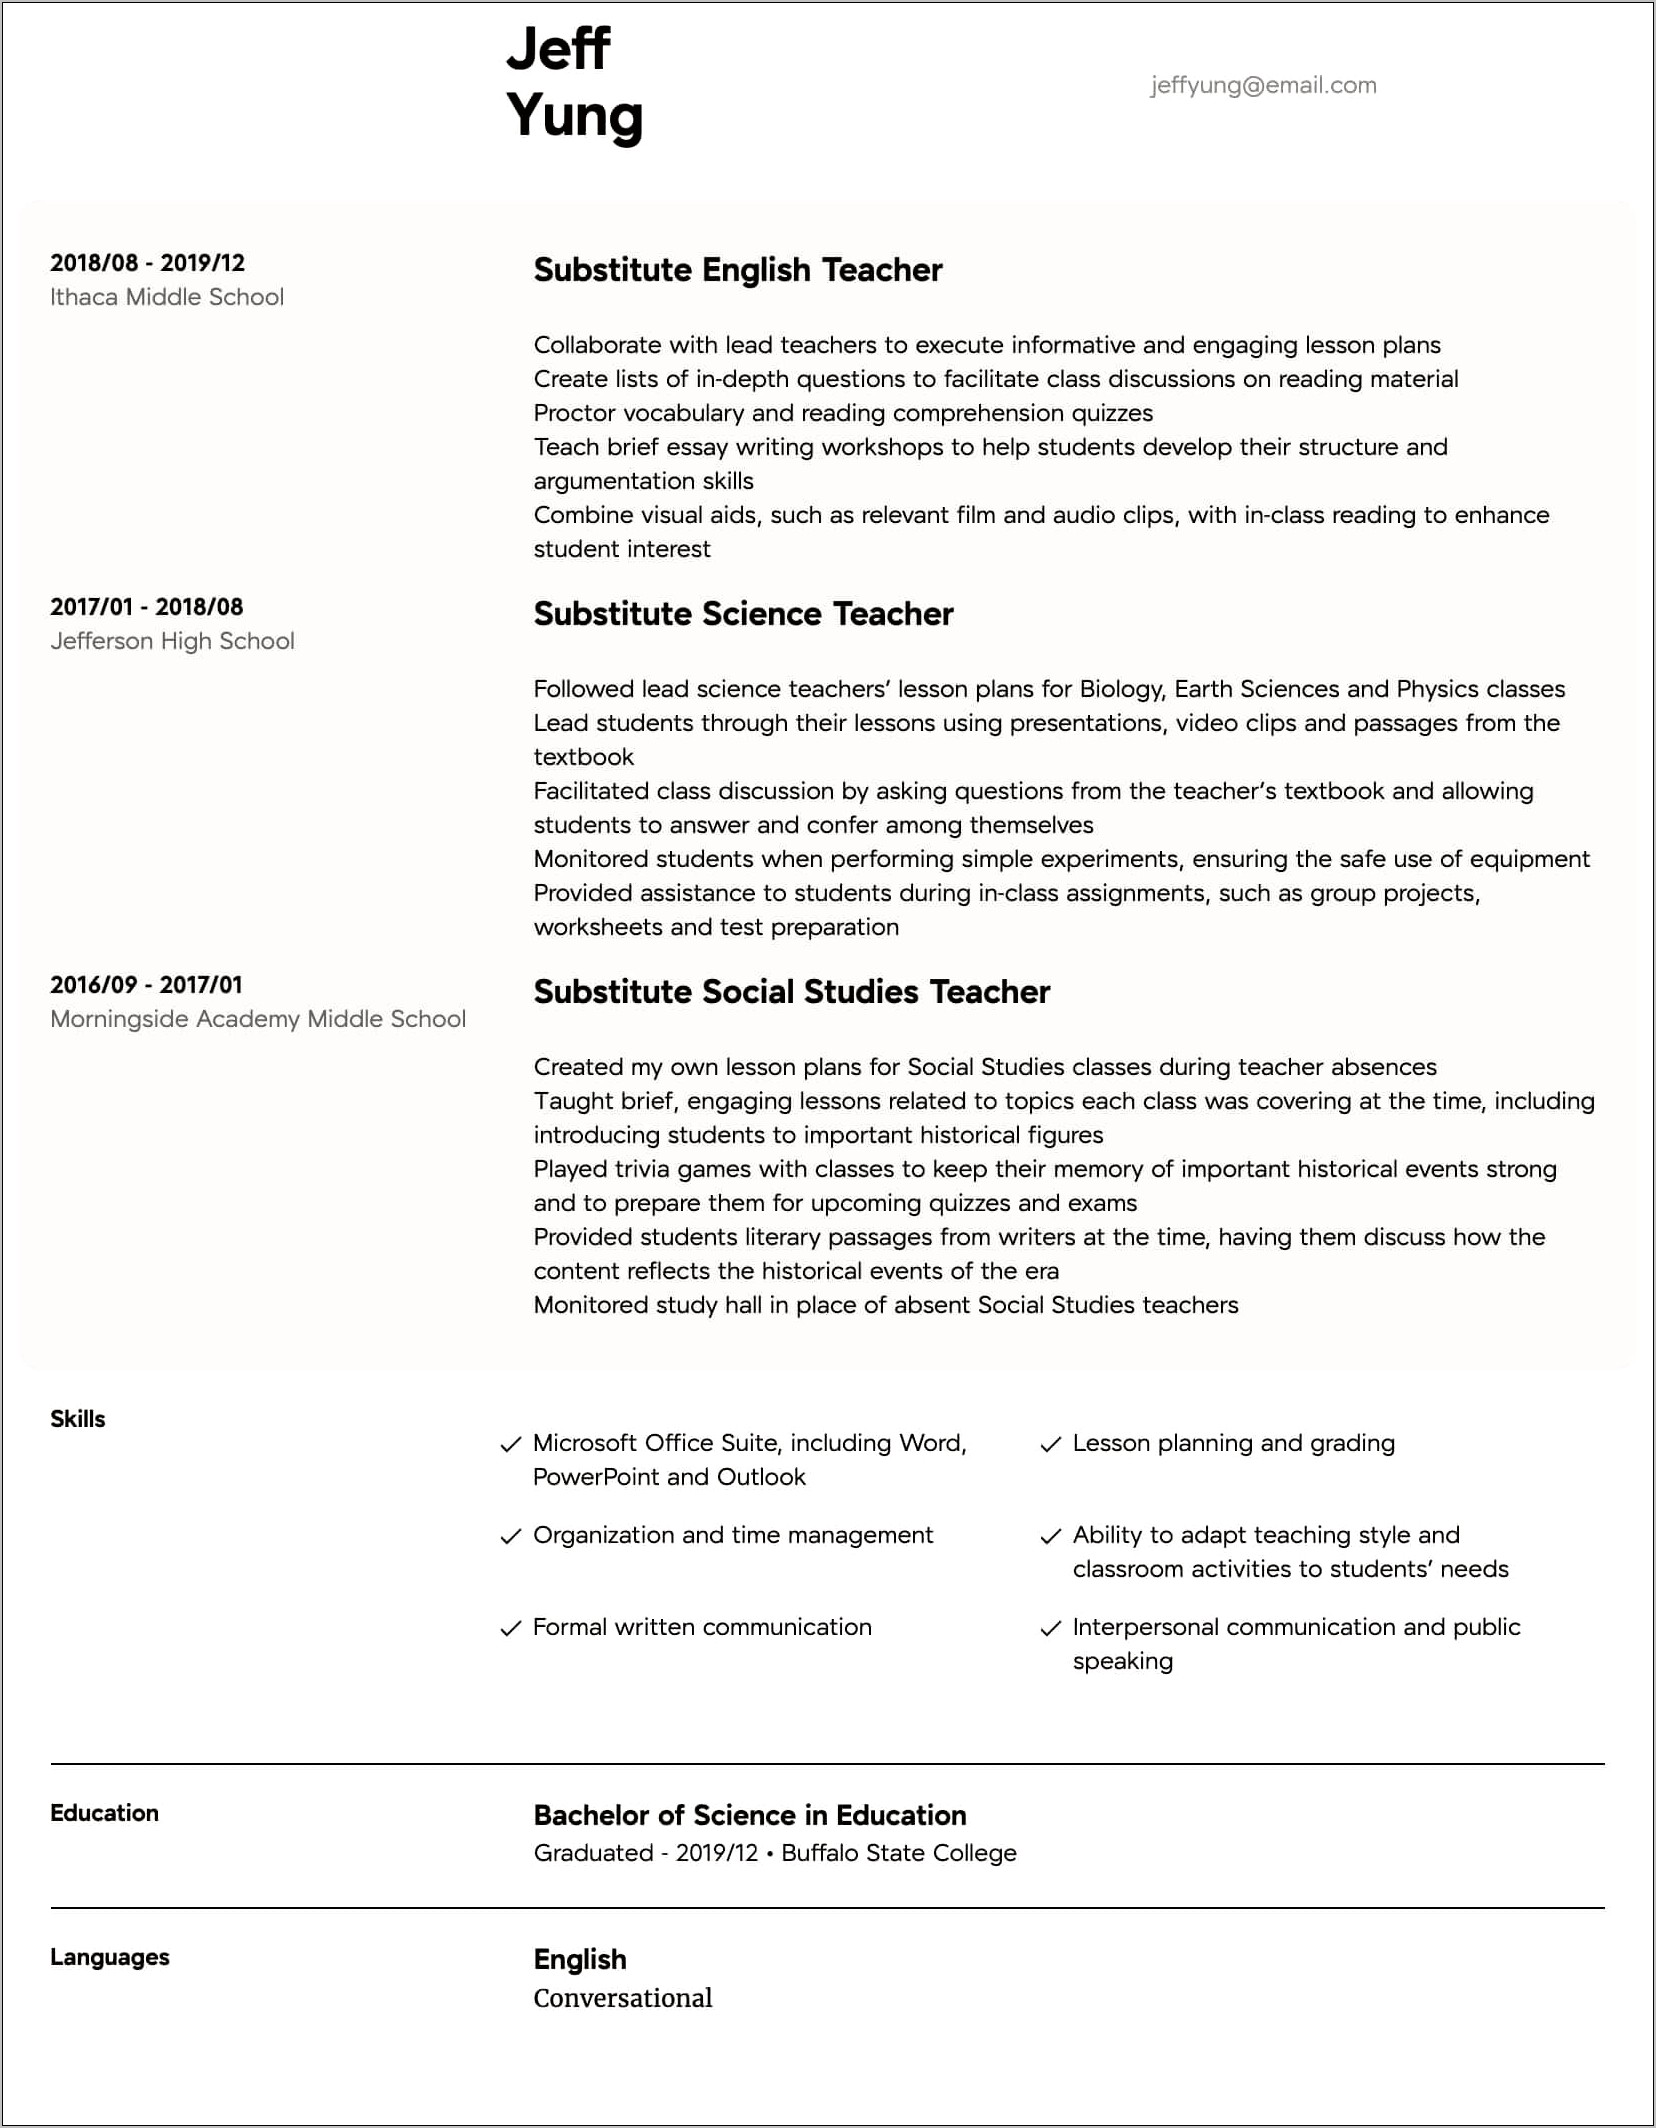 Sample Resume For Middle School Teachers Without Experience